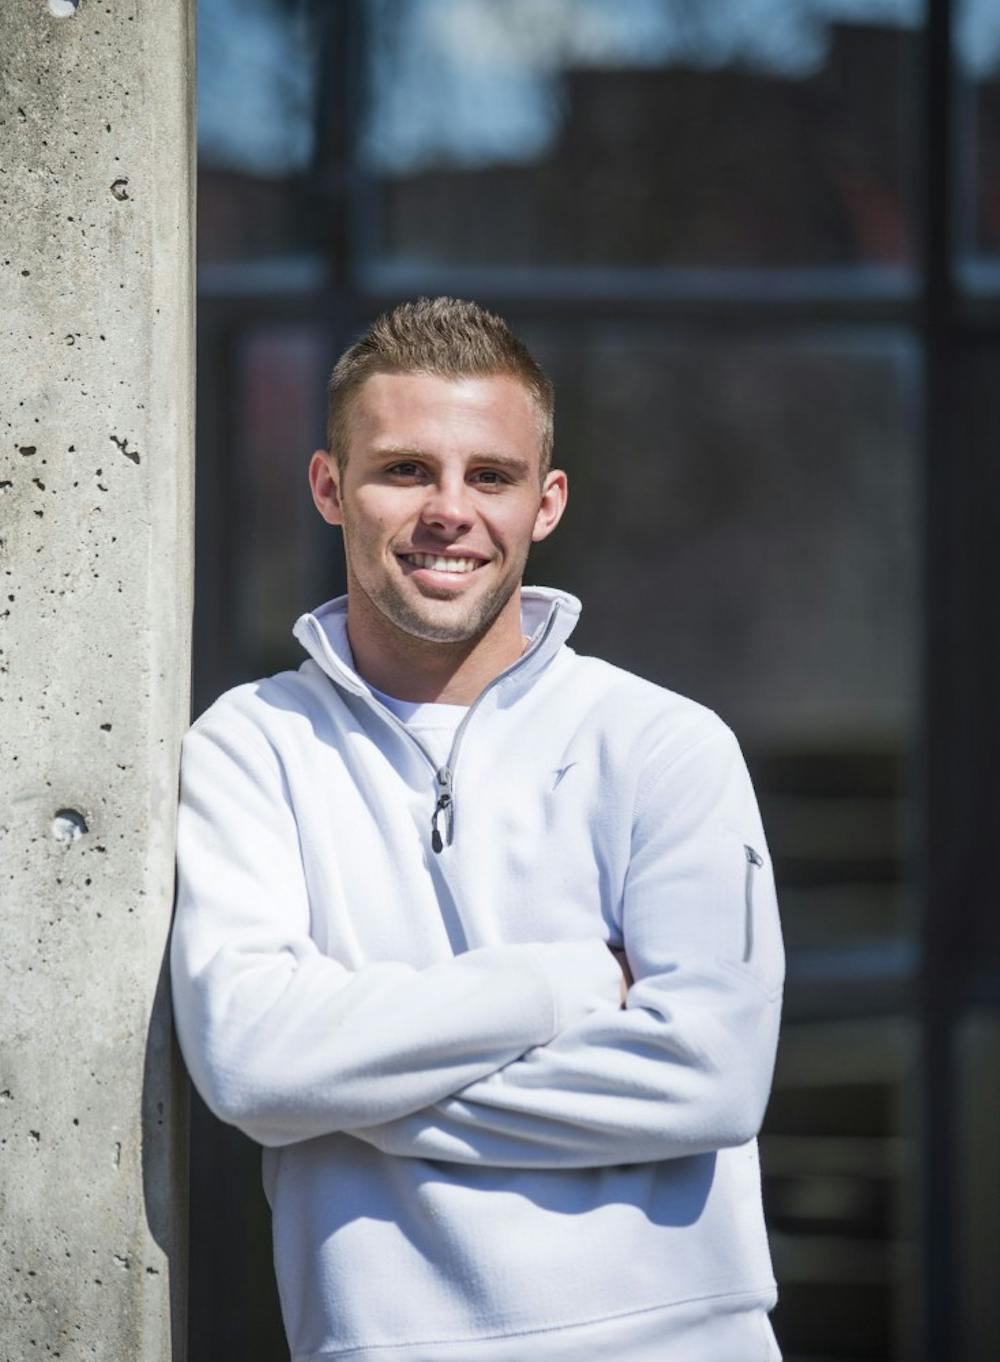 <p>Brock Frazer, a junior professional selling major, has been playing hockey since he was 3 years old. He decided to come to Ball State after not wanting to risk playing junior hockey instead of going to school. <em>DN PHOTO BREANNA DAUGHERTY</em></p>